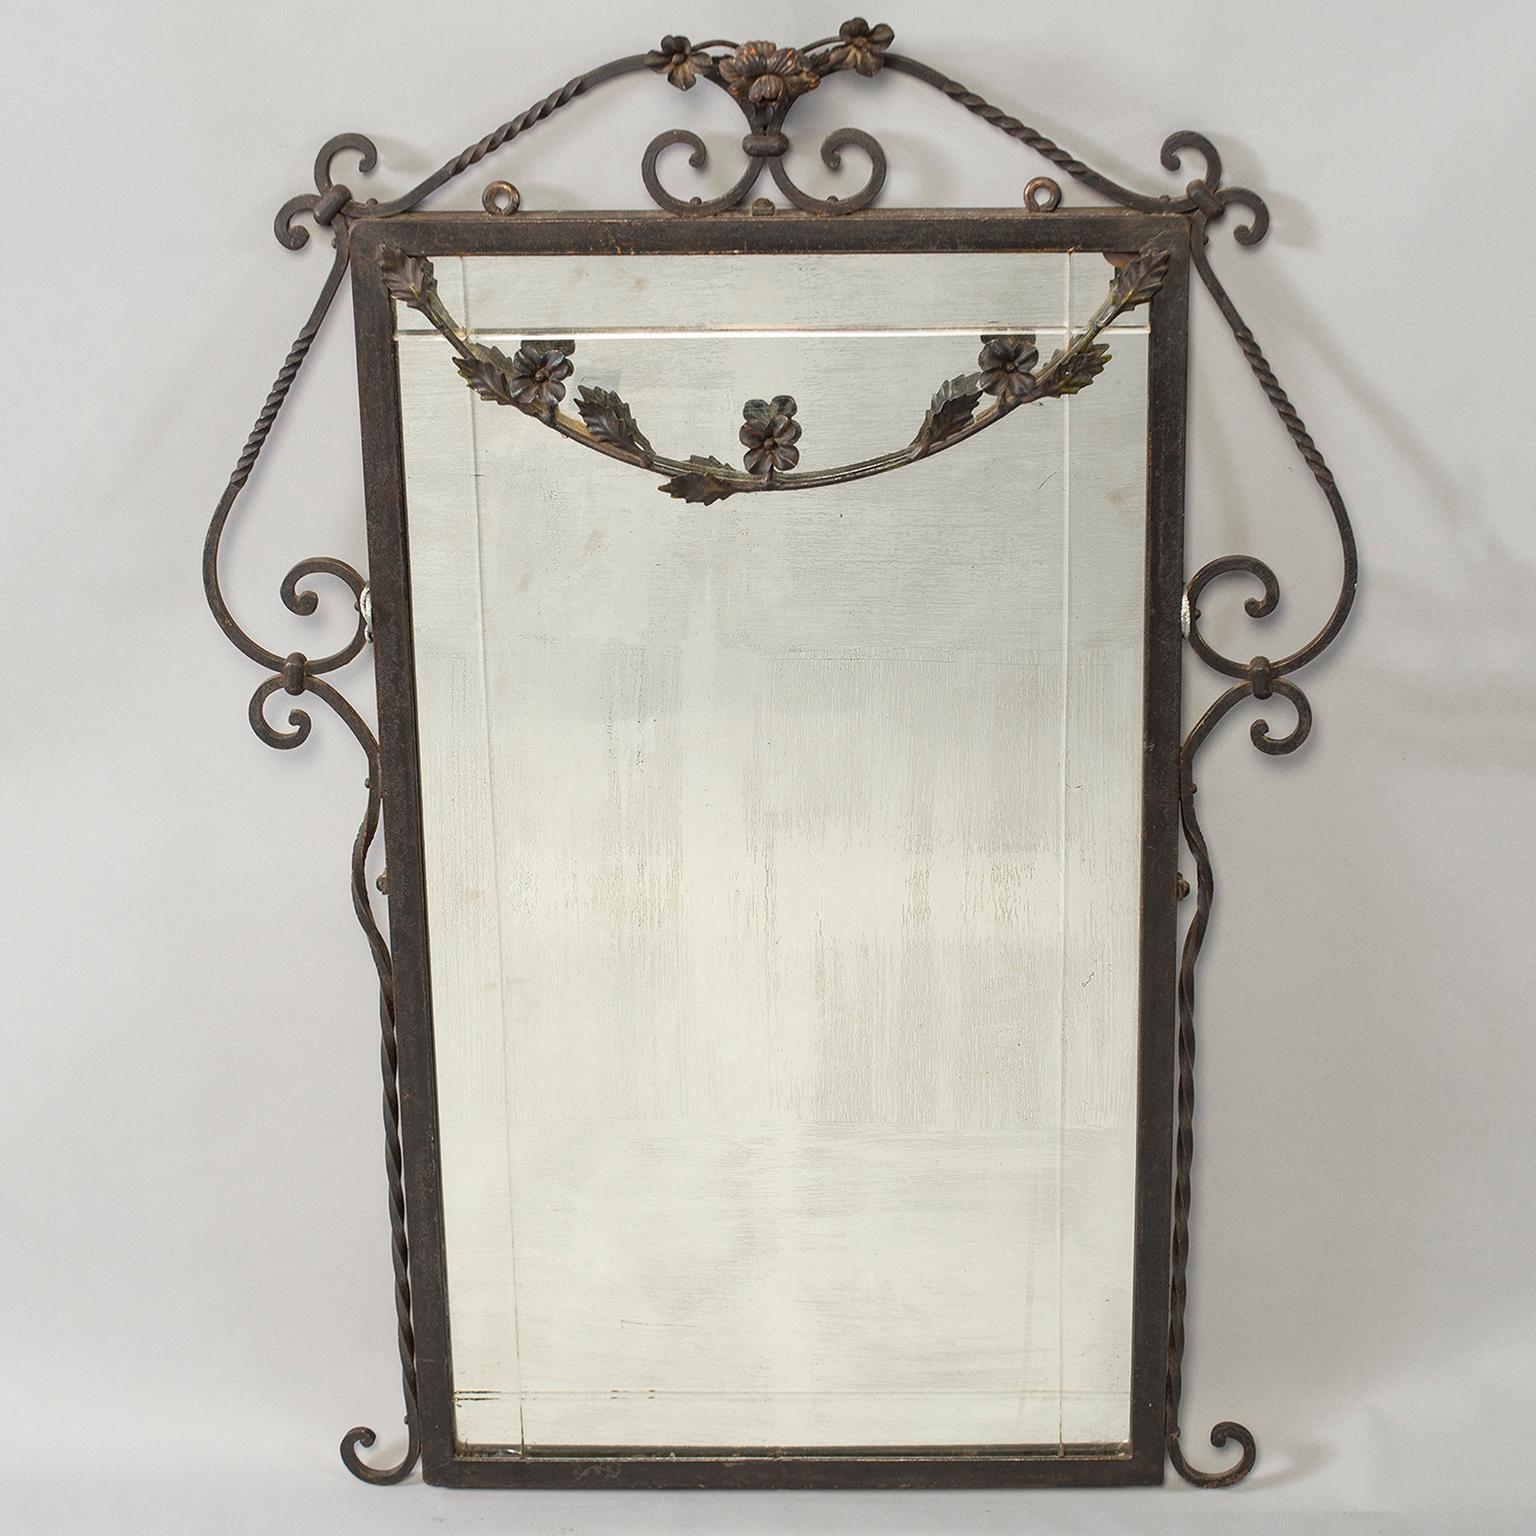 Mirror has a hand-wrought iron frame with a floral crest and decorative swag, circa 1920s. Scrolled details at the base and top with an iron chain for hanging.